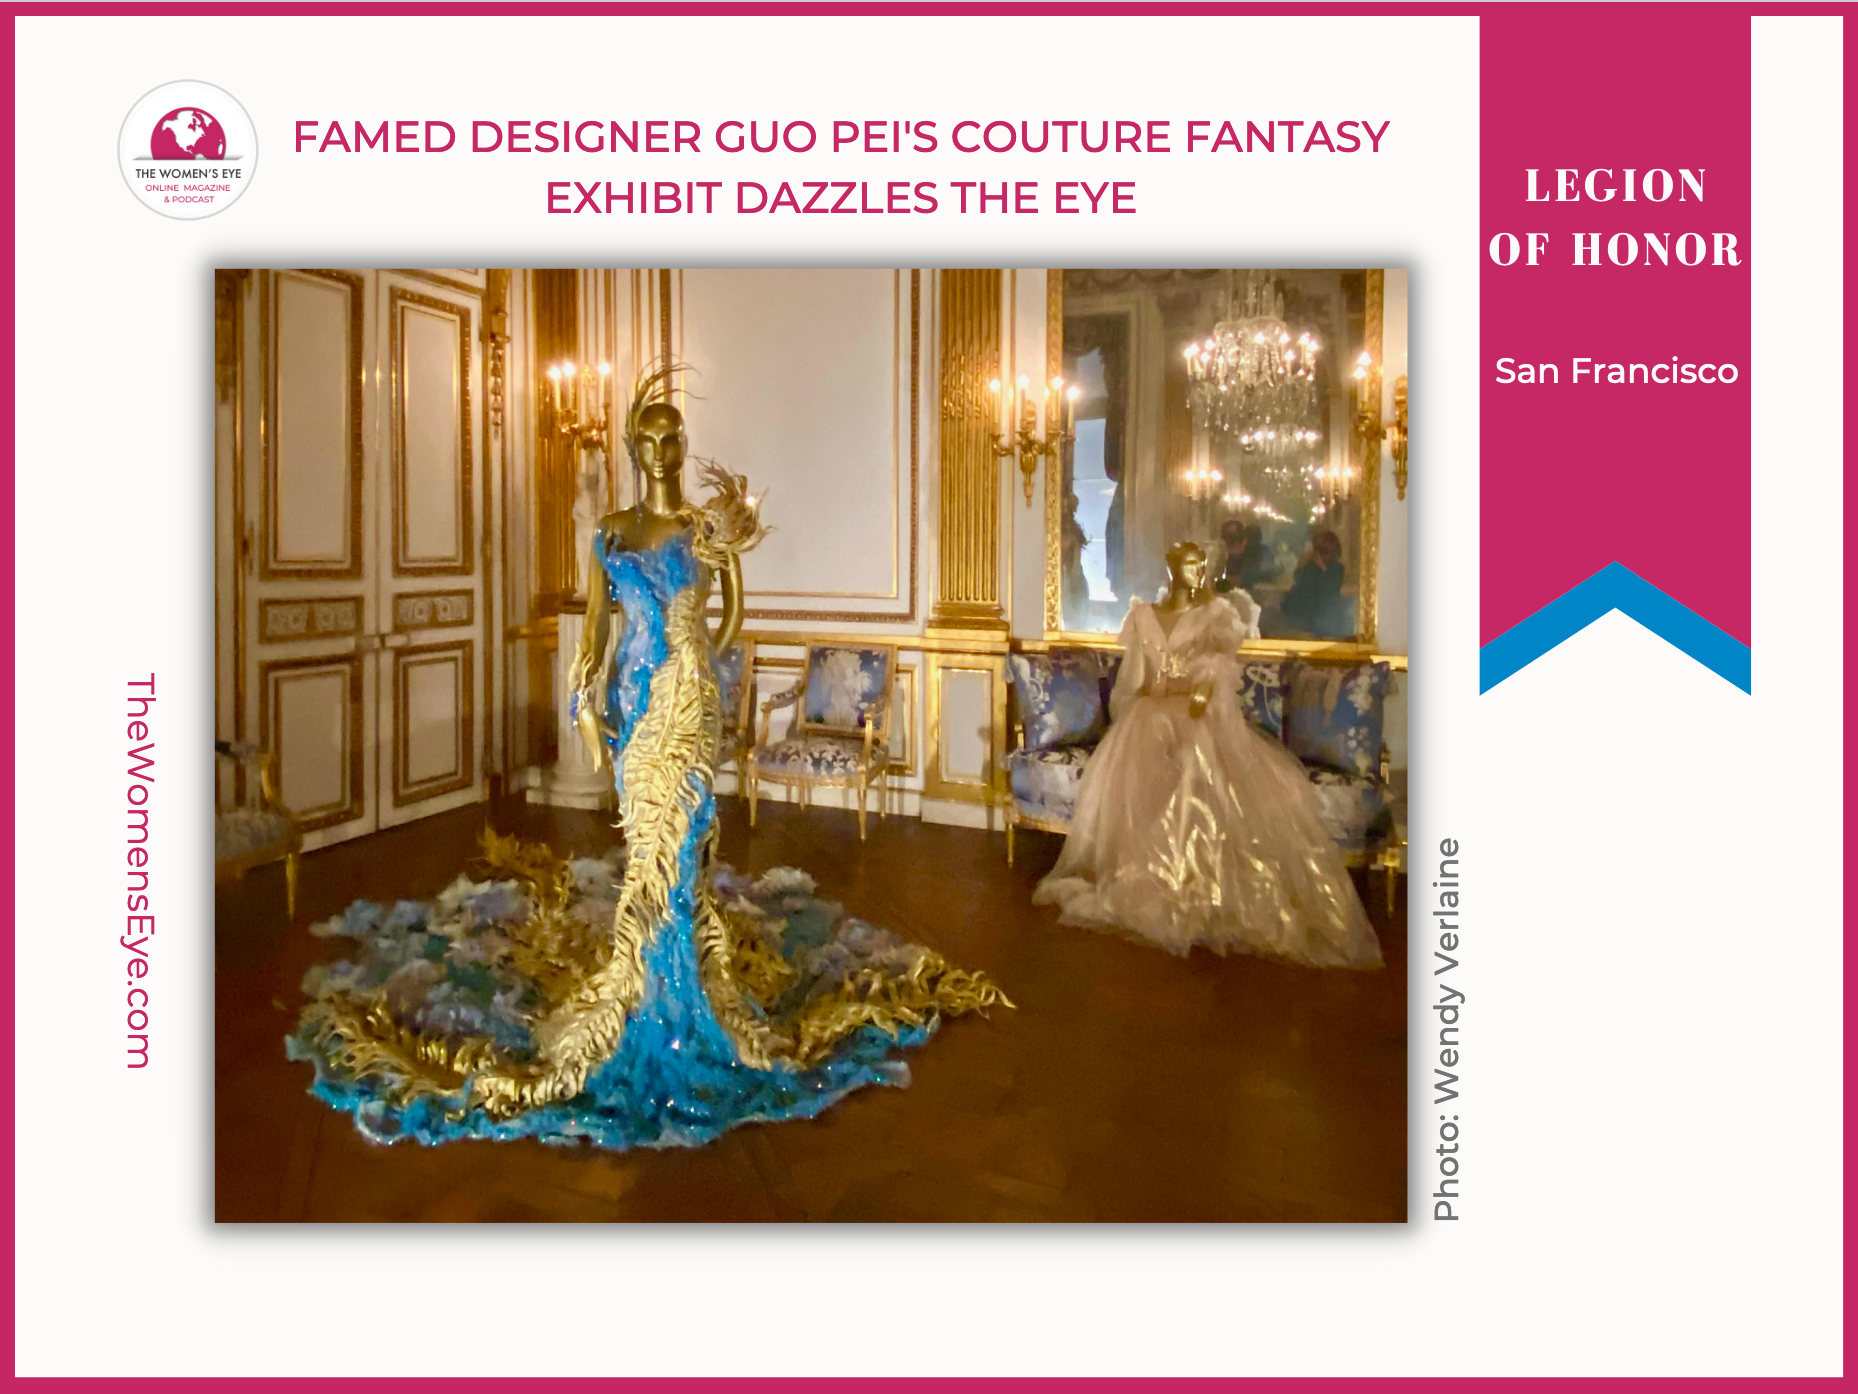 Famed Designer Guo Pei Dazzles the Eye with Her Couture Fantasy Exhibit at Legion of Honor San Francisco | Photo and article by Wendy Verlaine | TheWomensEye.com